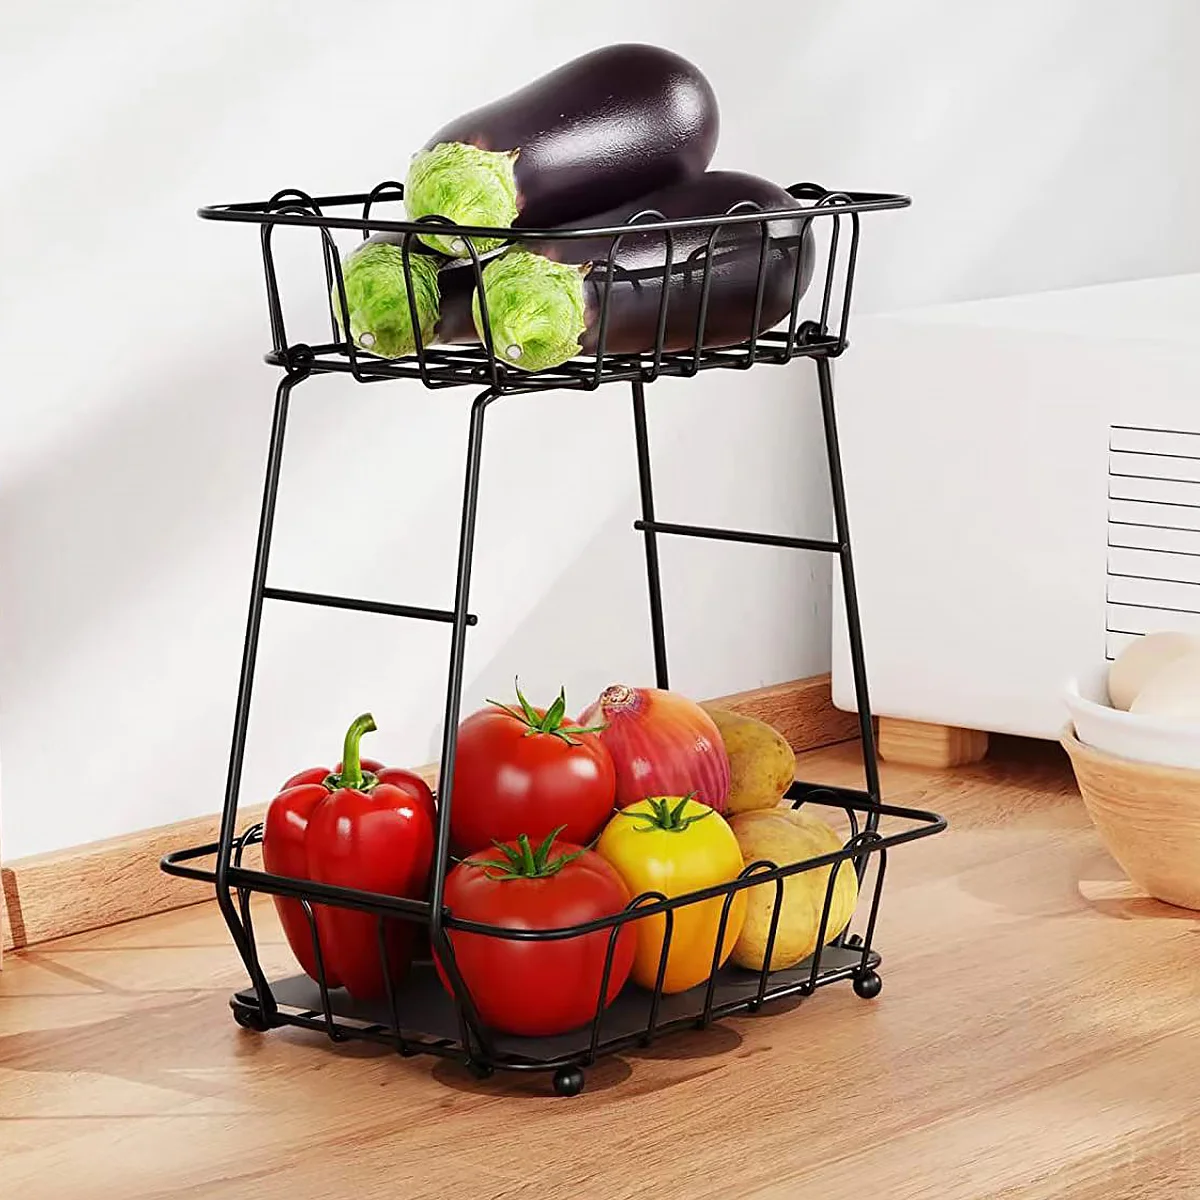 

New 2 Tier Fruit Basket Detachable Vegetable Storage Stand with Banana Hangers Sturdy Iron Bread Basket Multifunctional Fruits